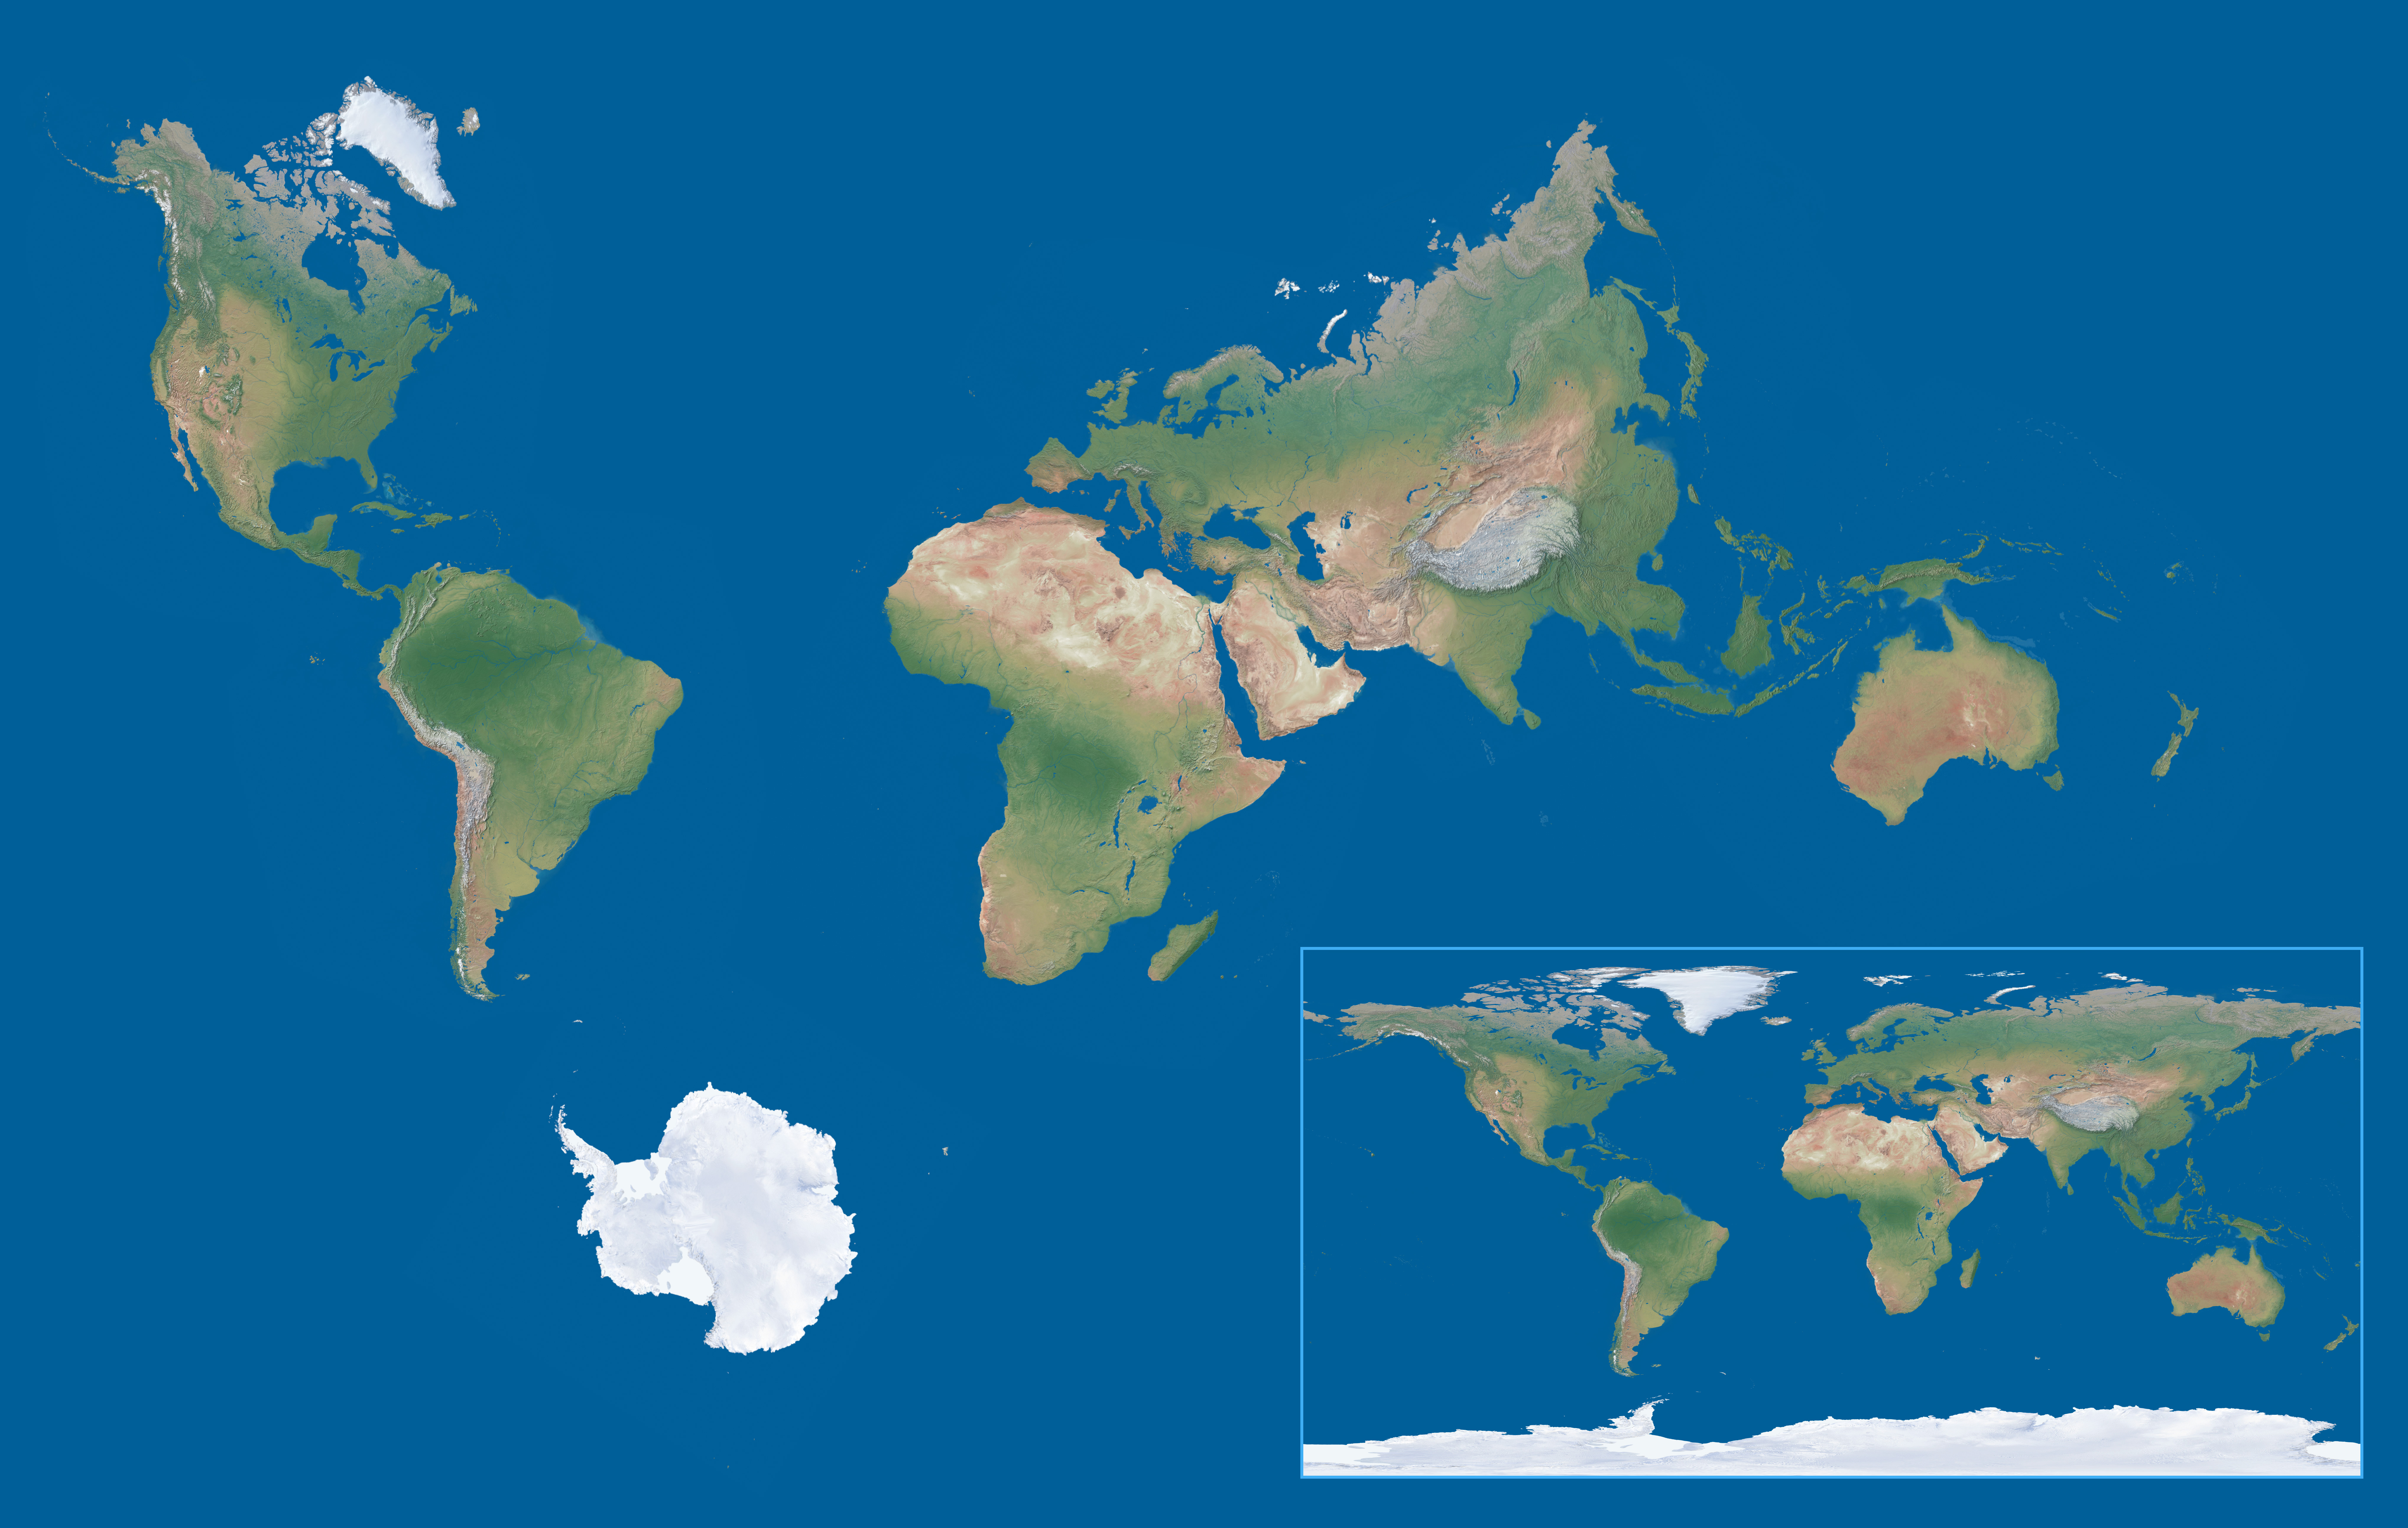 True Map Of Earth File:World map true proportioned continents approximation with 